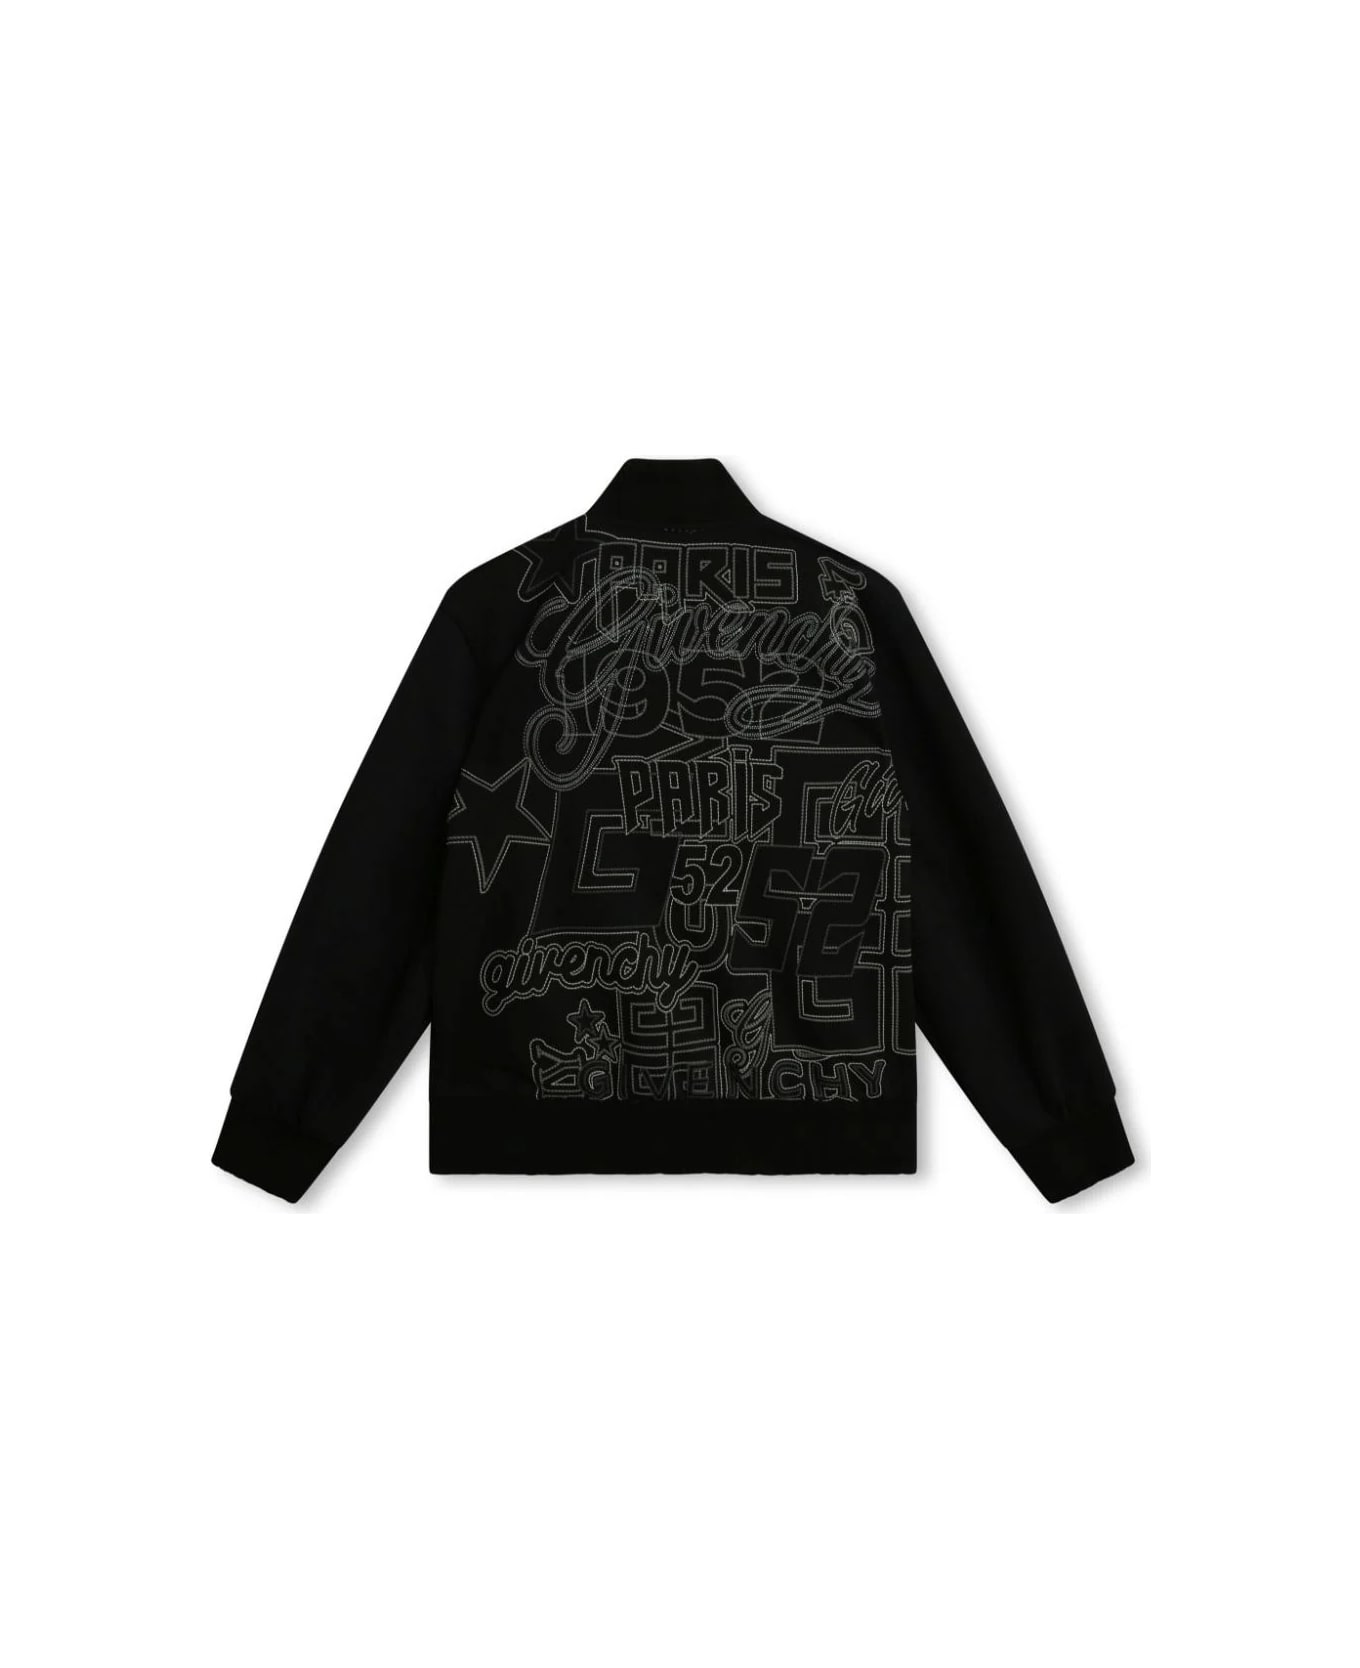 Givenchy Black Bomber Jacket With All-over Embroidery - Black